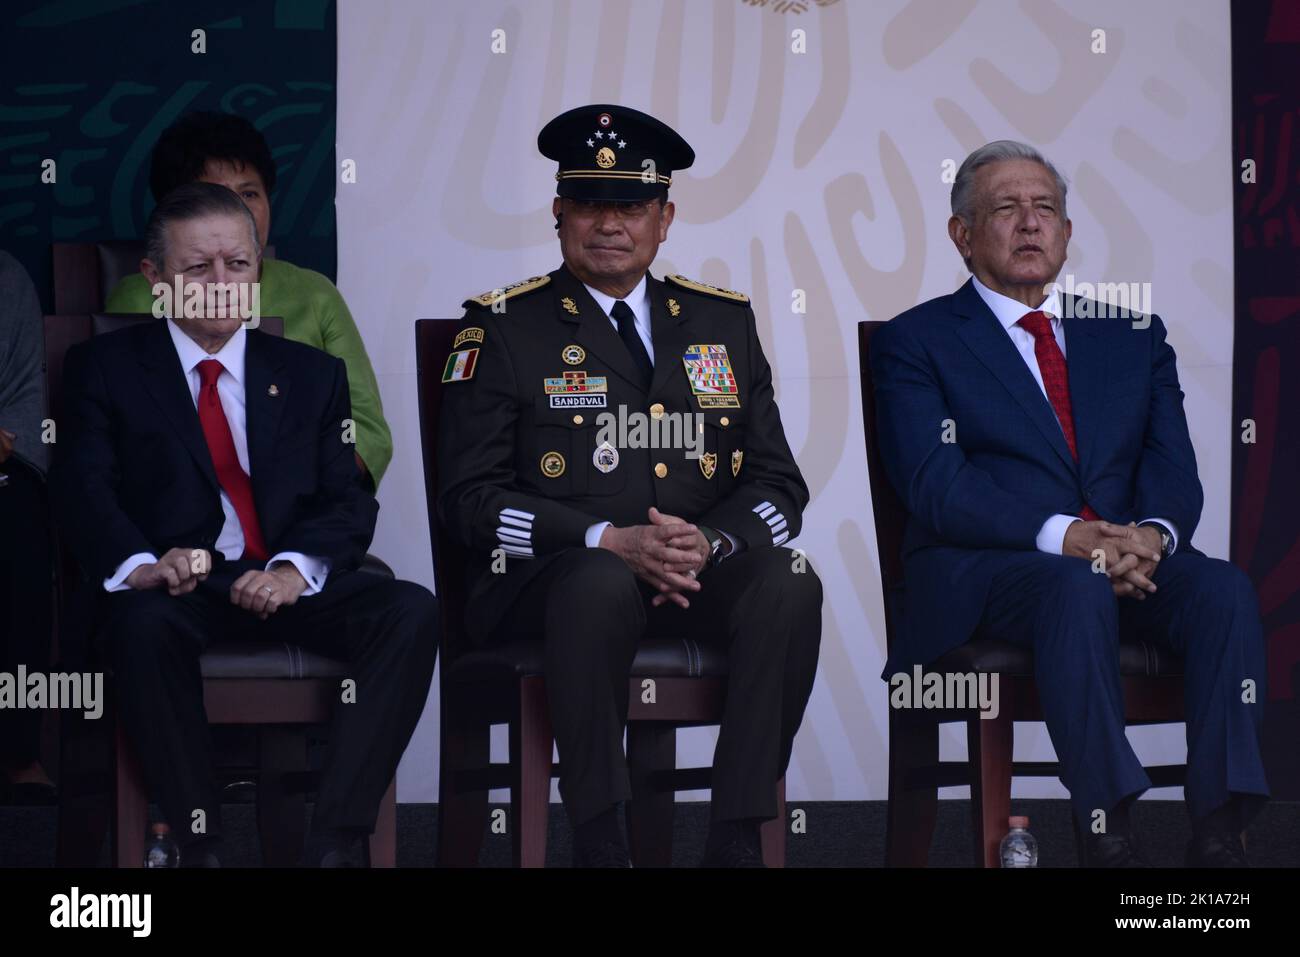 Mexico City, Mexico. 16th Sep, 2022. September 16, 2022, Mexico City, Mexico: Mexico’s President Andres Manuel Lopez Obrador accompanied by Secretary of National Defense (SEDENA) Luis Cresencio Sandoval and president of the Supreme Court of Justice Arturo Zaldivar during  the ceremony of the civic-military parade as part of the commemoration of the 212th Anniversary of the beginning of Mexico's Independence in the downtown. on September 16, 2022 in Mexico City, Mexico. (Photo by Carlos Tischler/ Eyepix Group) Credit: Eyepix Group/Alamy Live News Stock Photo